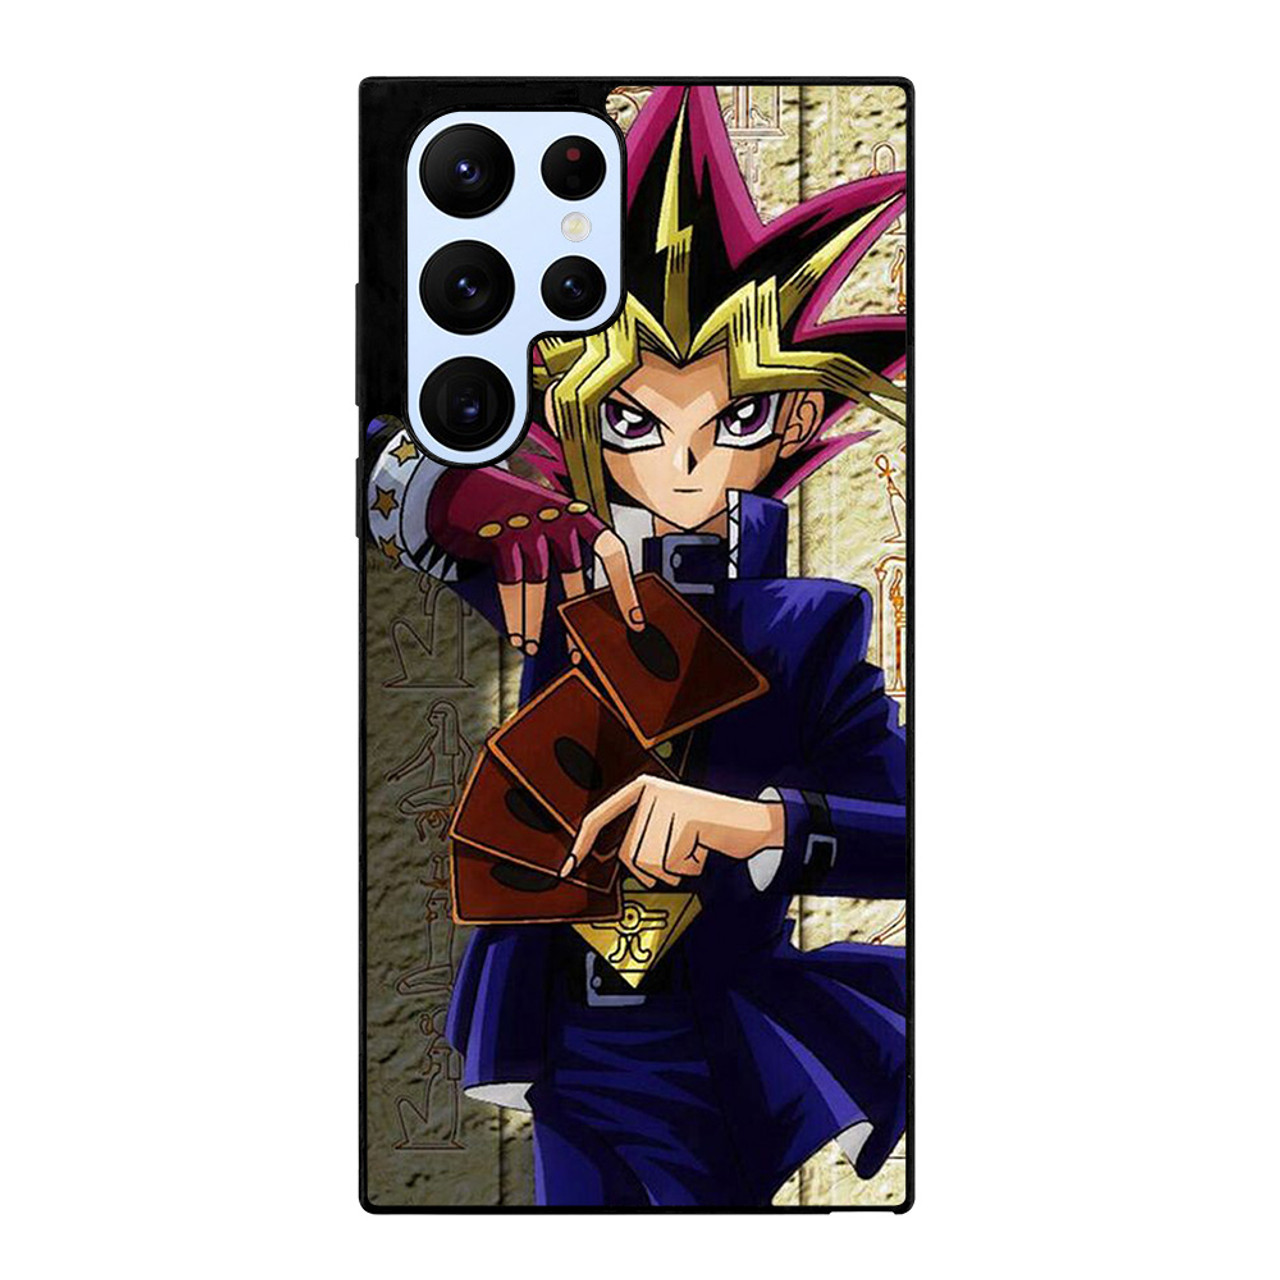 Samsung Galaxy S23 Ultra S23 Plus S22 Ultra S22 Plus One Piece Ace Luffy  Sabo anime case casing cover | Shopee Malaysia